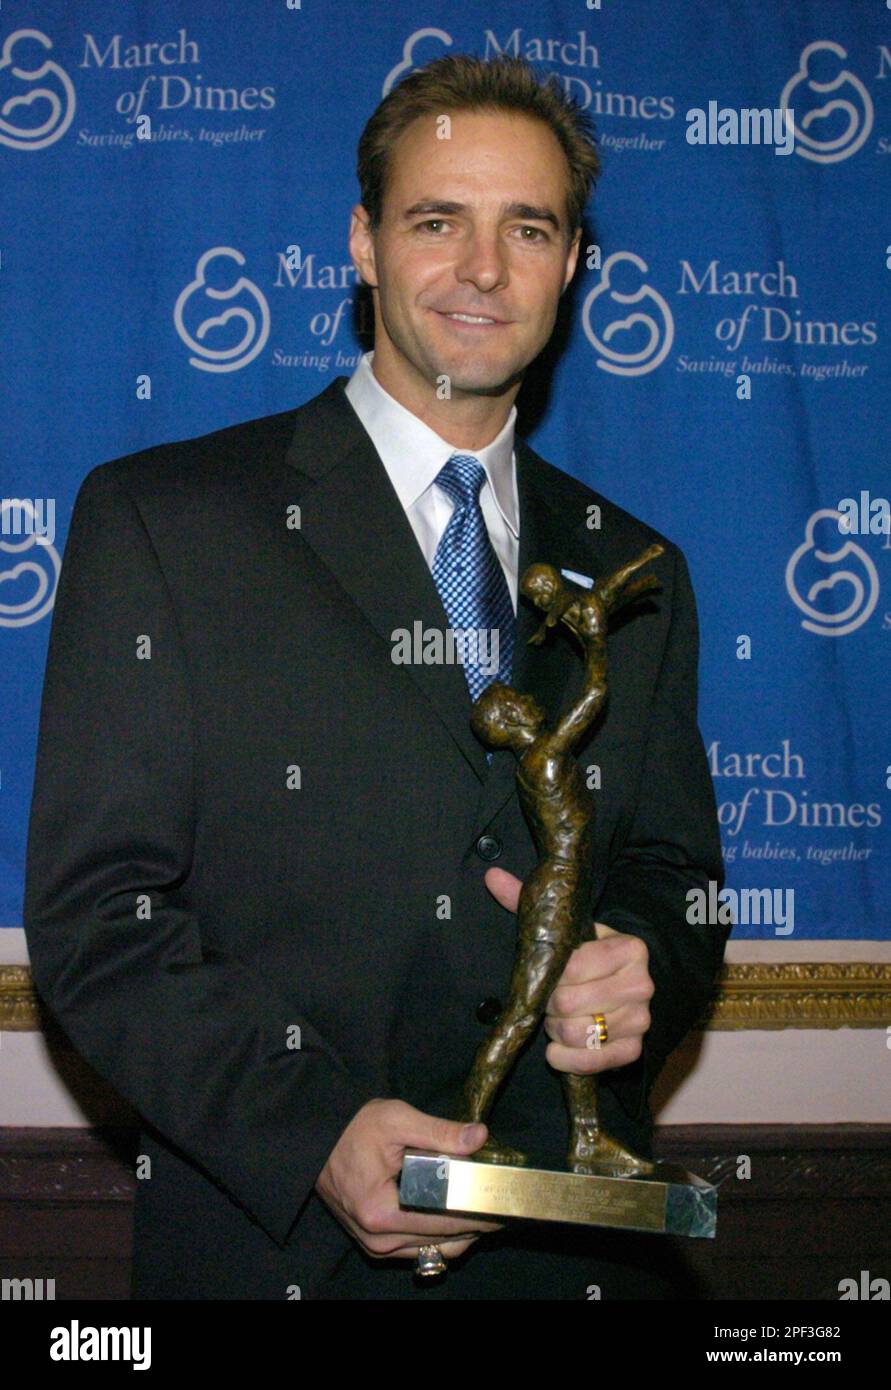 New York Mets pitcher Al Leiter poses with his trophy as the recipient of  the 2003 Sportsman of the Year award at the 20th Anniversary March of Dimes  Sports Luncheon, Wednesday, Dec.